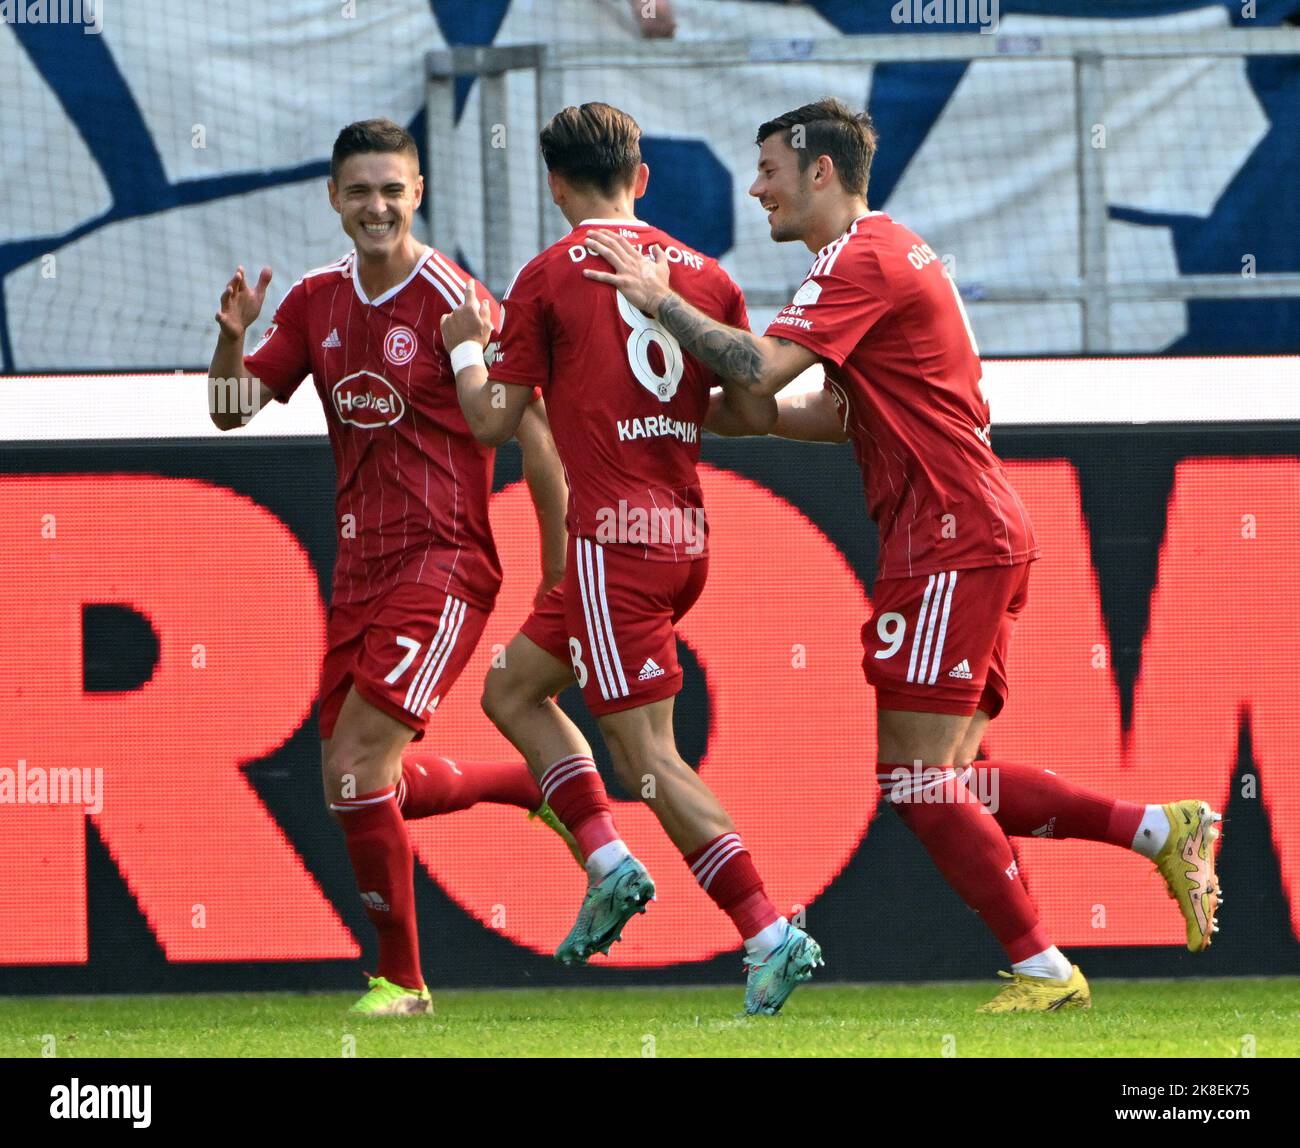 Karlsruhe, Germany. 23rd Oct, 2022. Soccer, 2. Bundesliga, Karlsruher SC - Fortuna Düsseldorf, Matchday 13, at BBBank Wildpark. Düsseldorf players (l-r) Kristoffer Peterson, Michael Karbownik and Dawid Kownacki celebrate the 0:2 goal by Kristoffer Peterson. Credit: Uli Deck/dpa - IMPORTANT NOTE: In accordance with the requirements of the DFL Deutsche Fußball Liga and the DFB Deutscher Fußball-Bund, it is prohibited to use or have used photographs taken in the stadium and/or of the match in the form of sequence pictures and/or video-like photo series./dpa/Alamy Live News Stock Photo